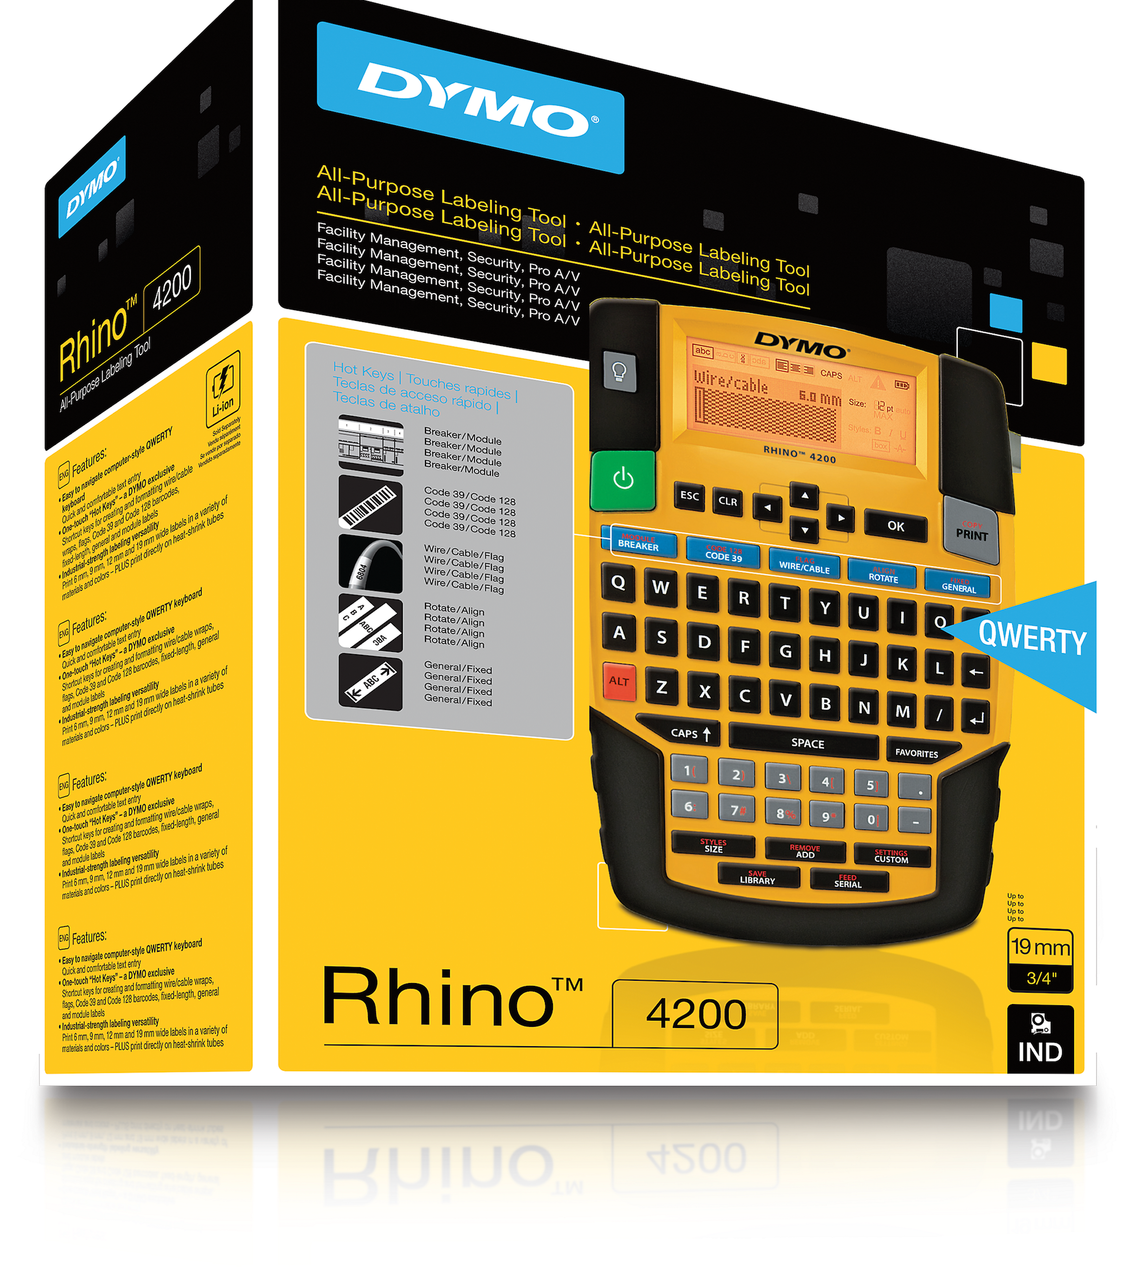 DYMO Rhino 5200 Industrial Portable Thermal Transfer Electronic Label  Maker, Yellow Print Labels Up to 19mm Wide, Auto Power Off, Monochrome,  LCD Di 通販